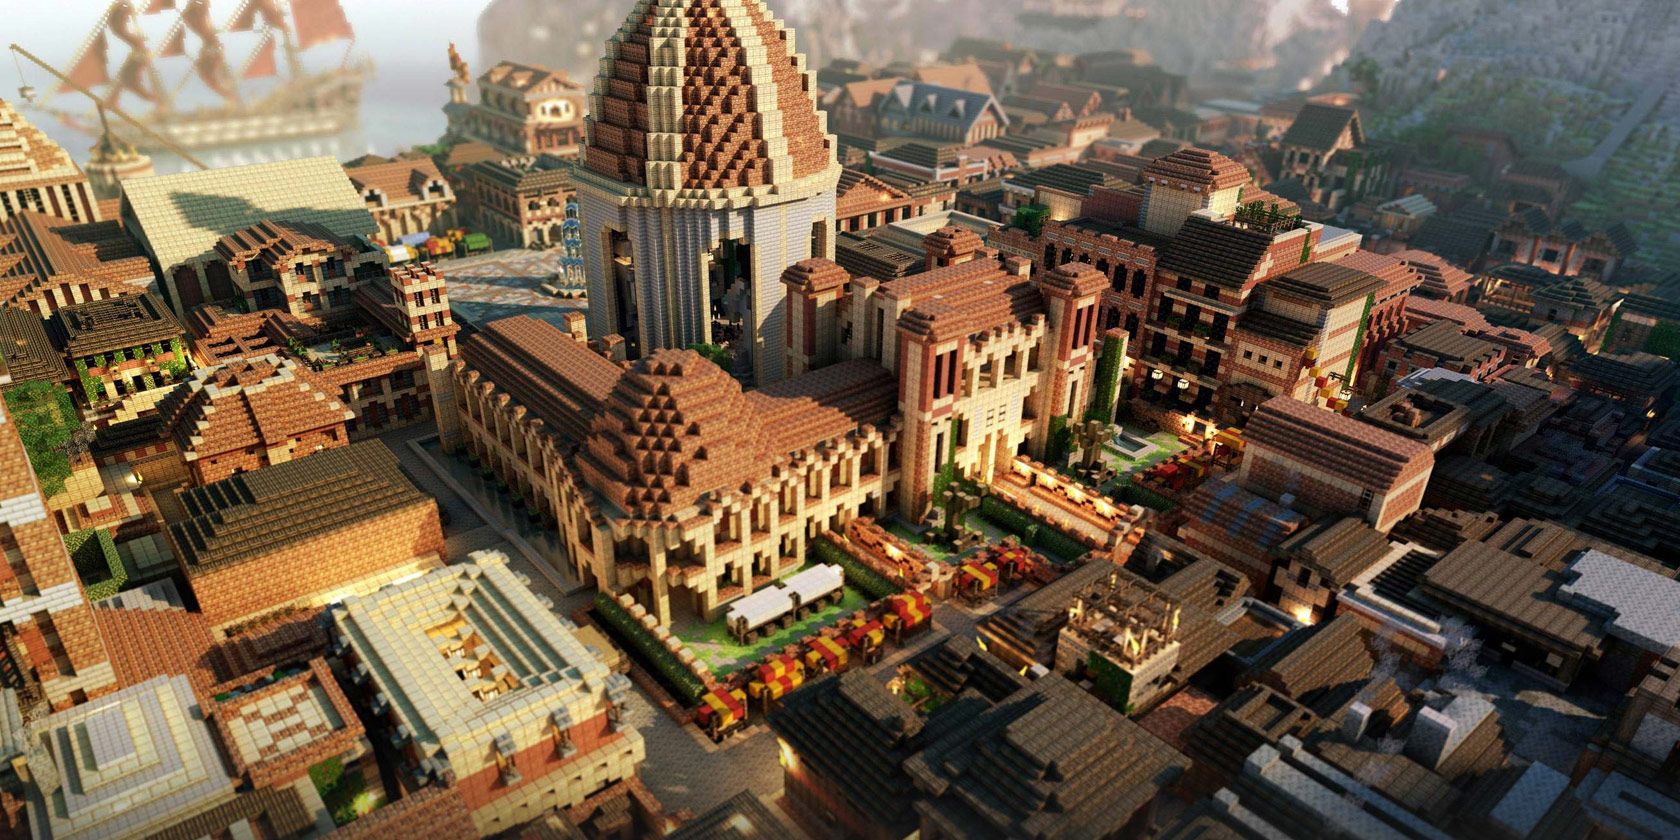 Are These The 5 Greatest Minecraft Worlds Ever Built?